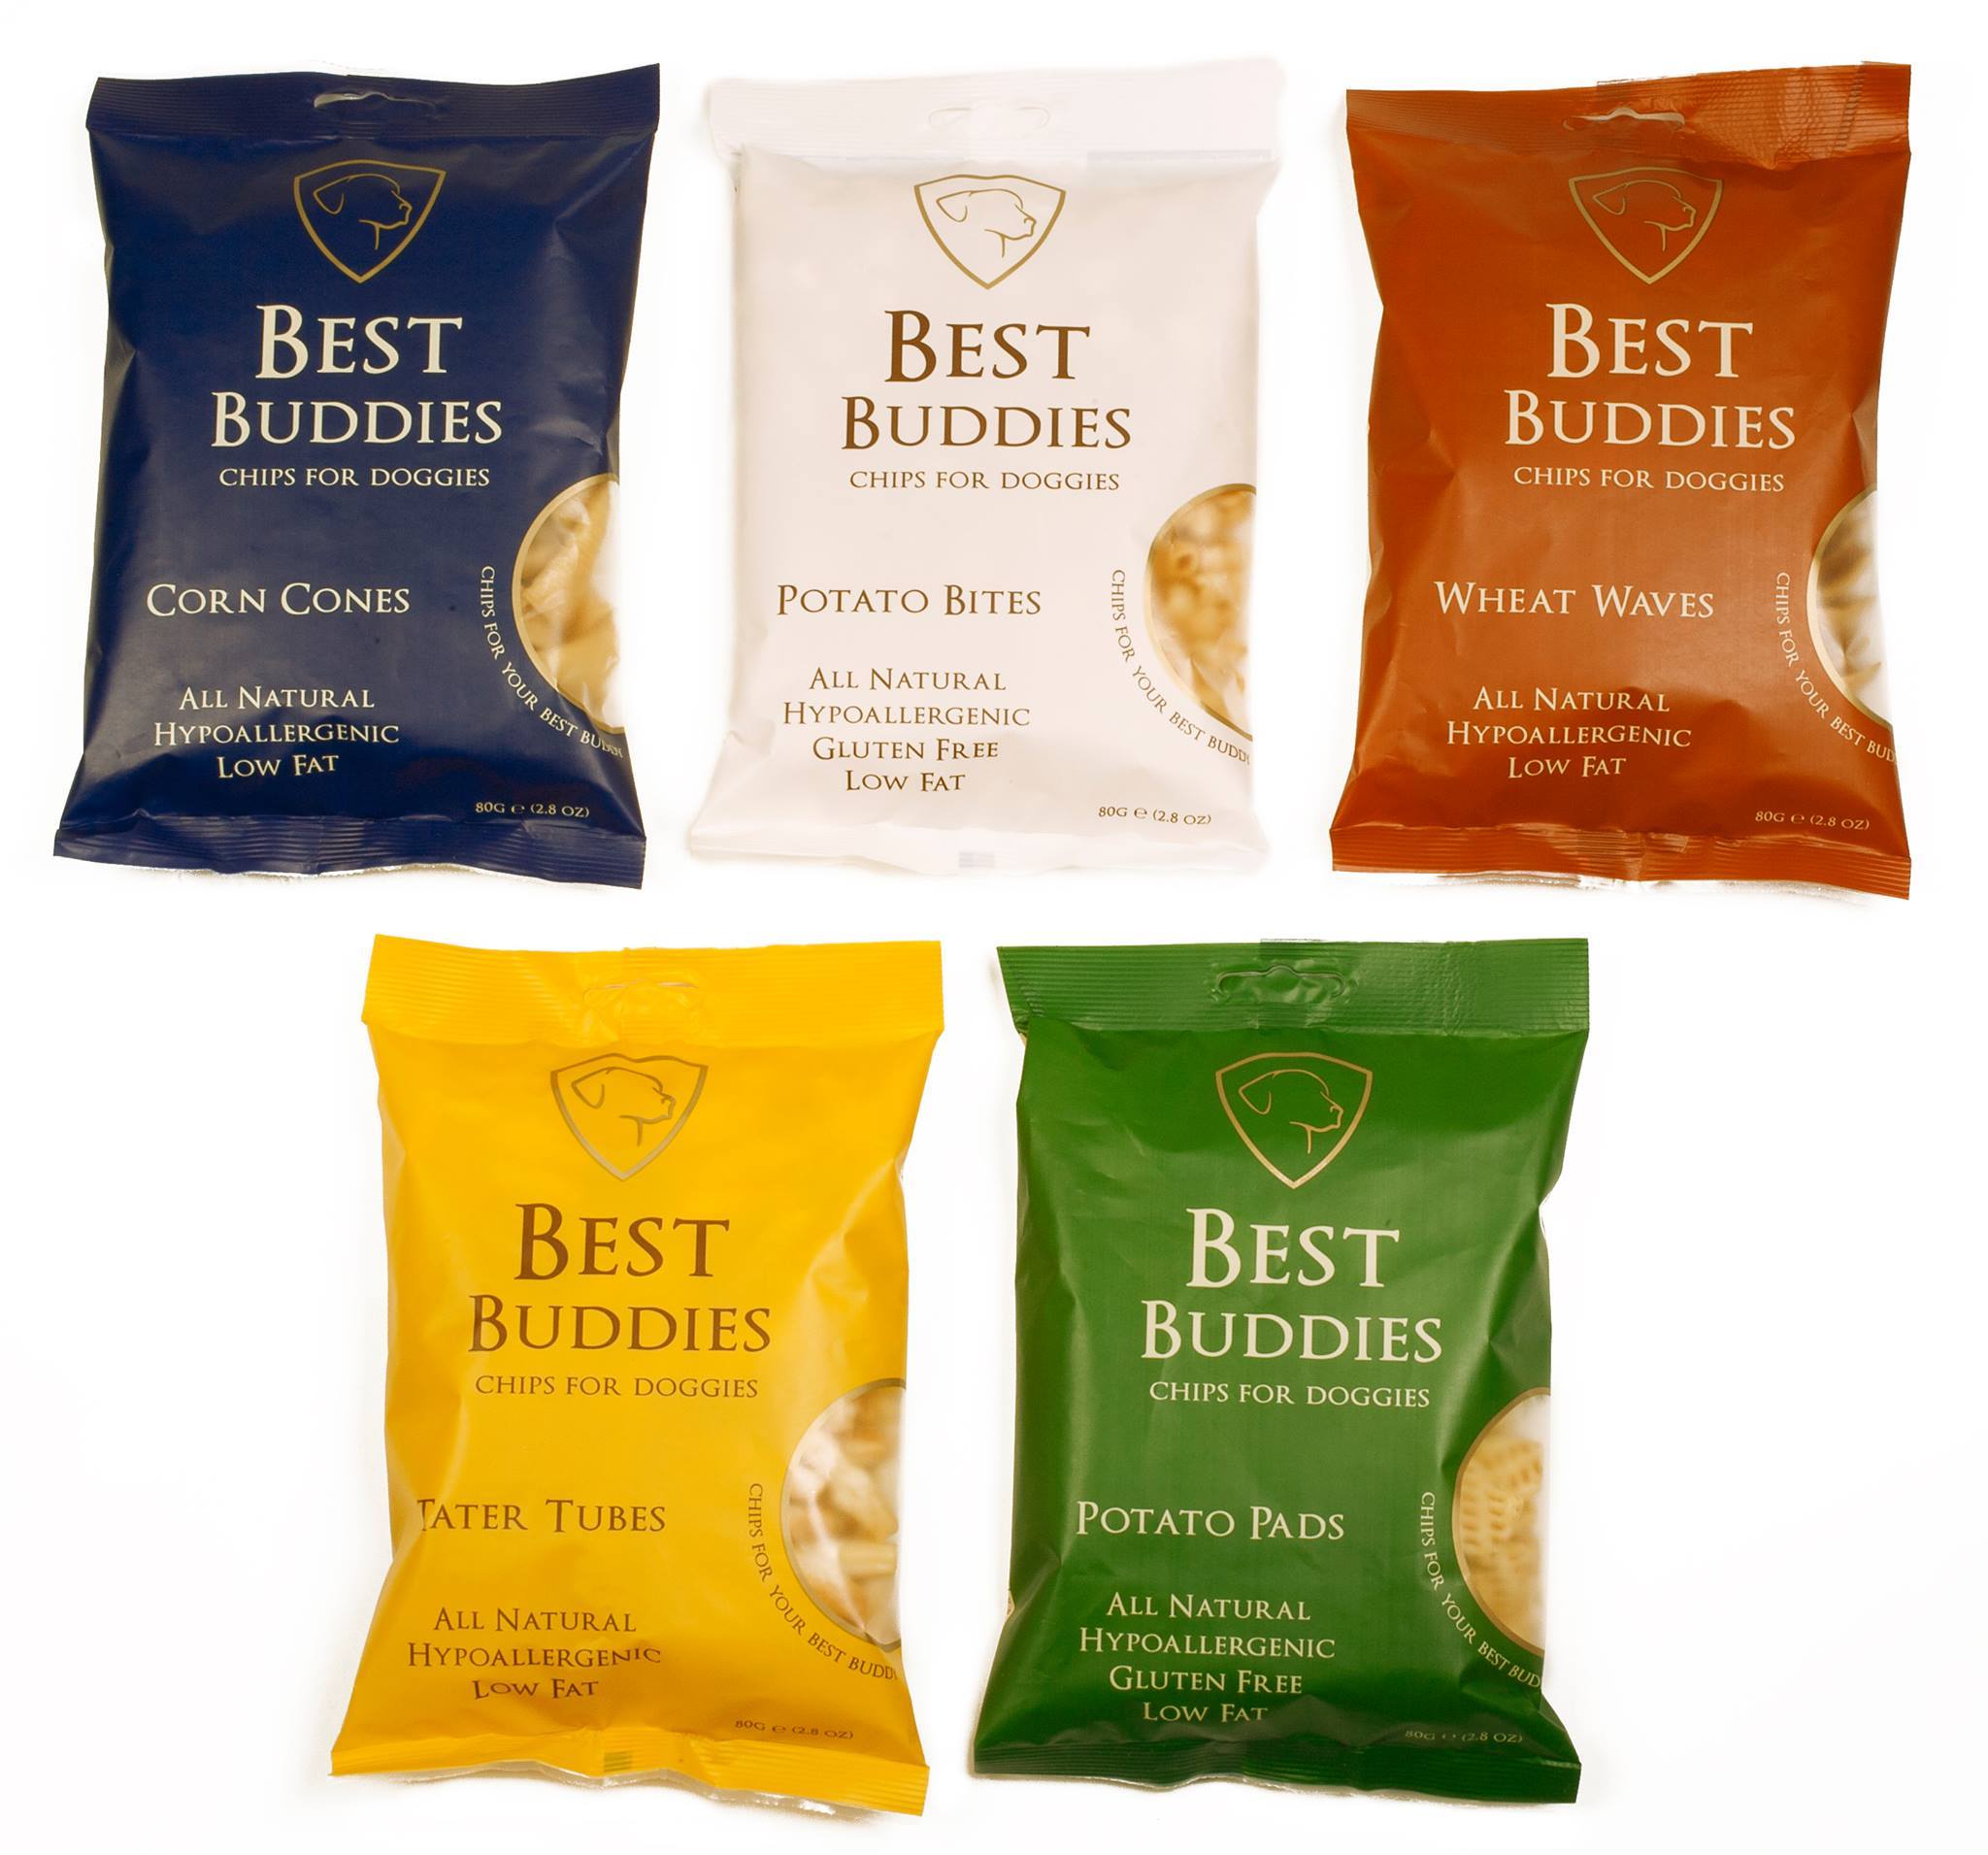 Best Buddies Chips for doggies: 100% natural ingredients without any preservatives. 